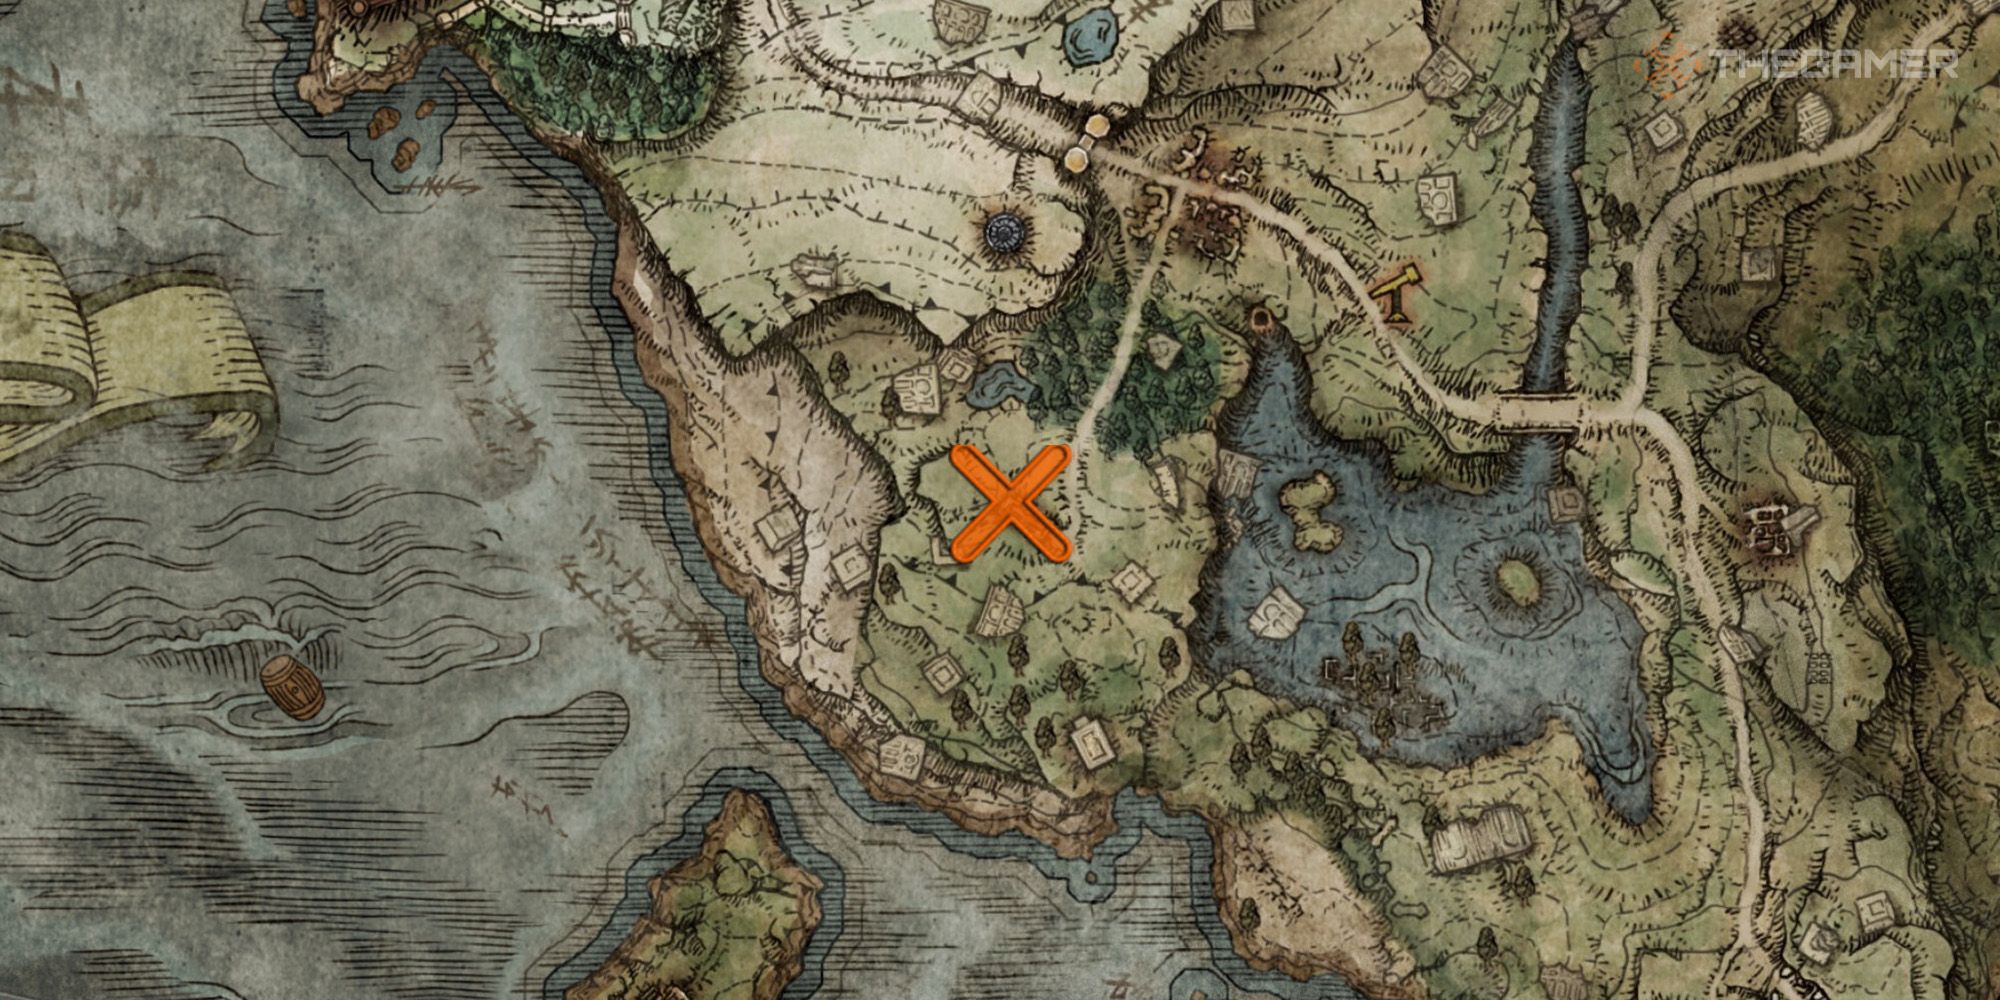 Elden Ring Map showing the location of Missionary's Cookbook [1]